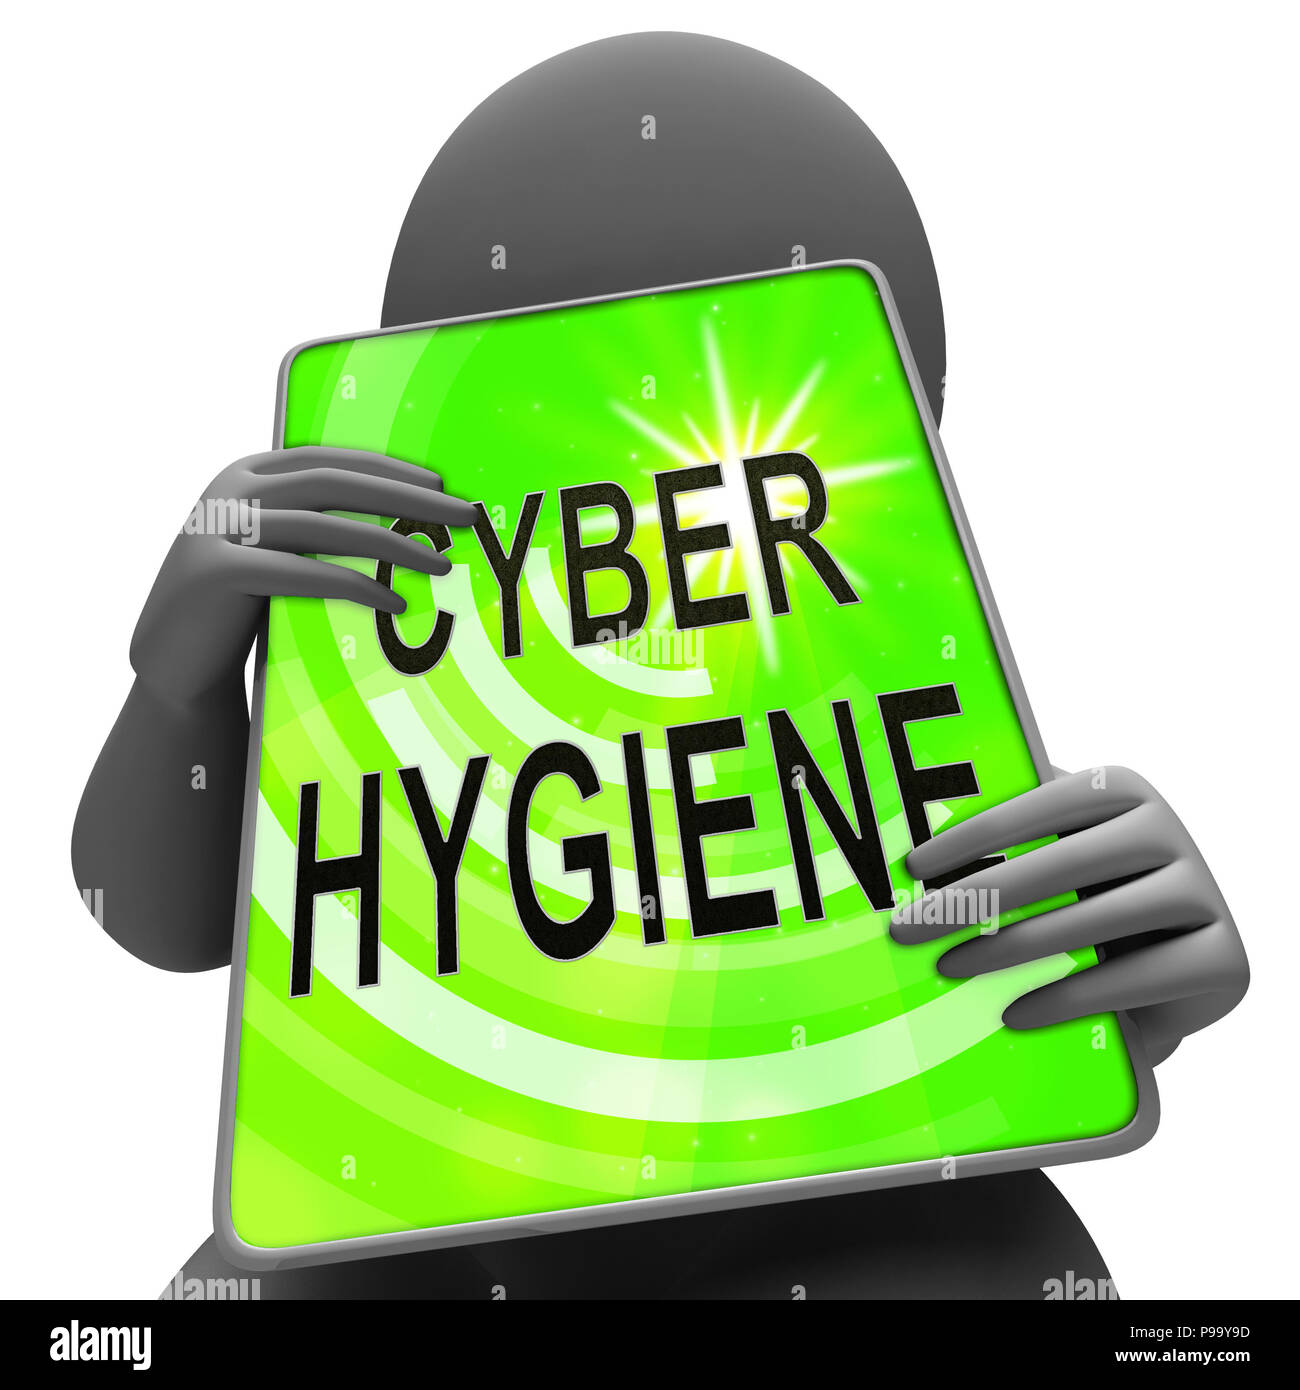 Cyber Hygiene Healthy Data Structure 3d Rendering Shows Internet Management  And Diagnostics For Cleaning Networks Stock Photo - Alamy